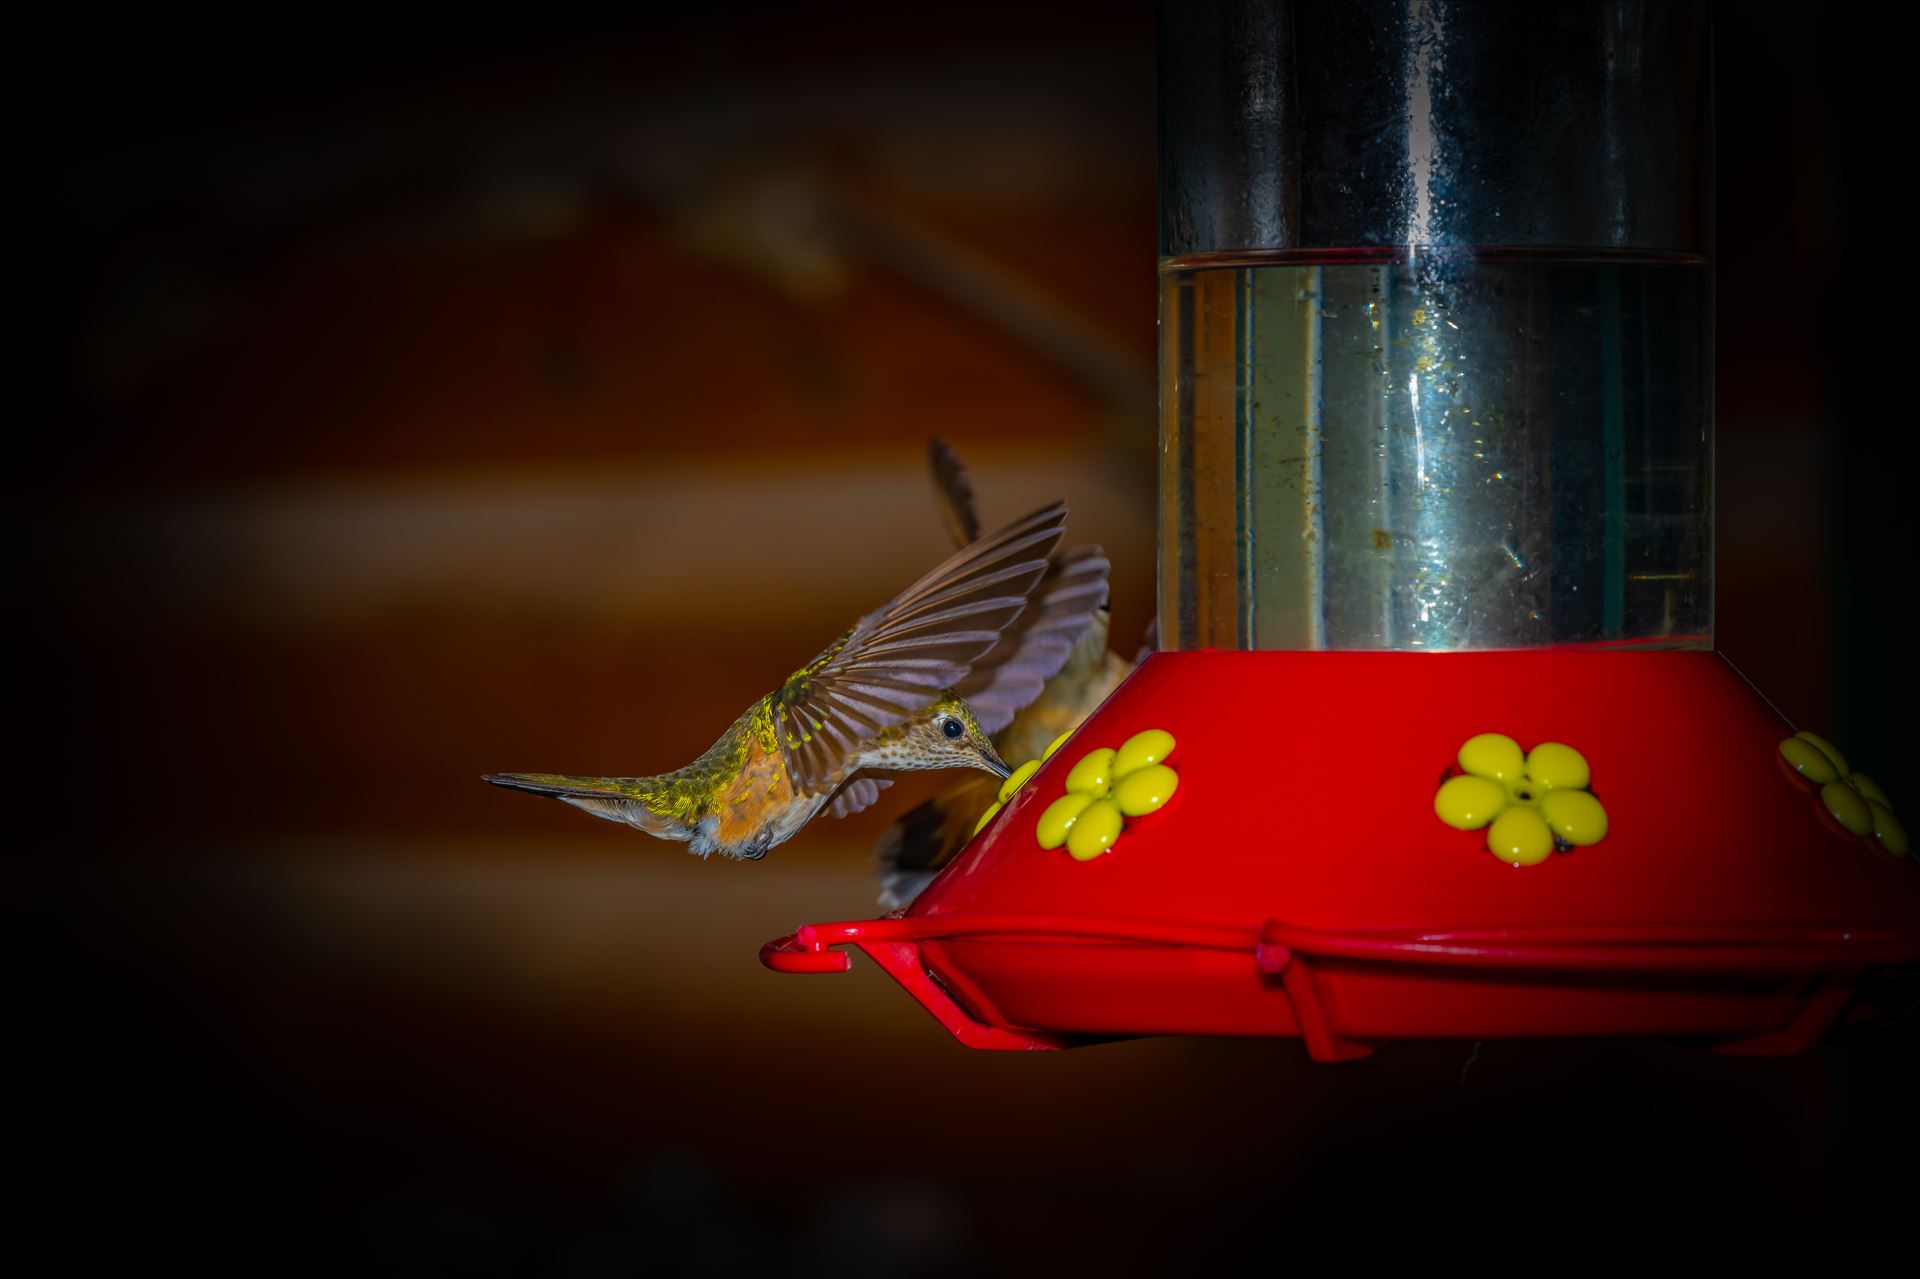 hummingbird at feeder 8500634 as ss sf.jpg - Hummingbird drinking sugar water from feeder. Cloudcroft New Mexico, Lincoln National Forest by Terry Kelly Photography